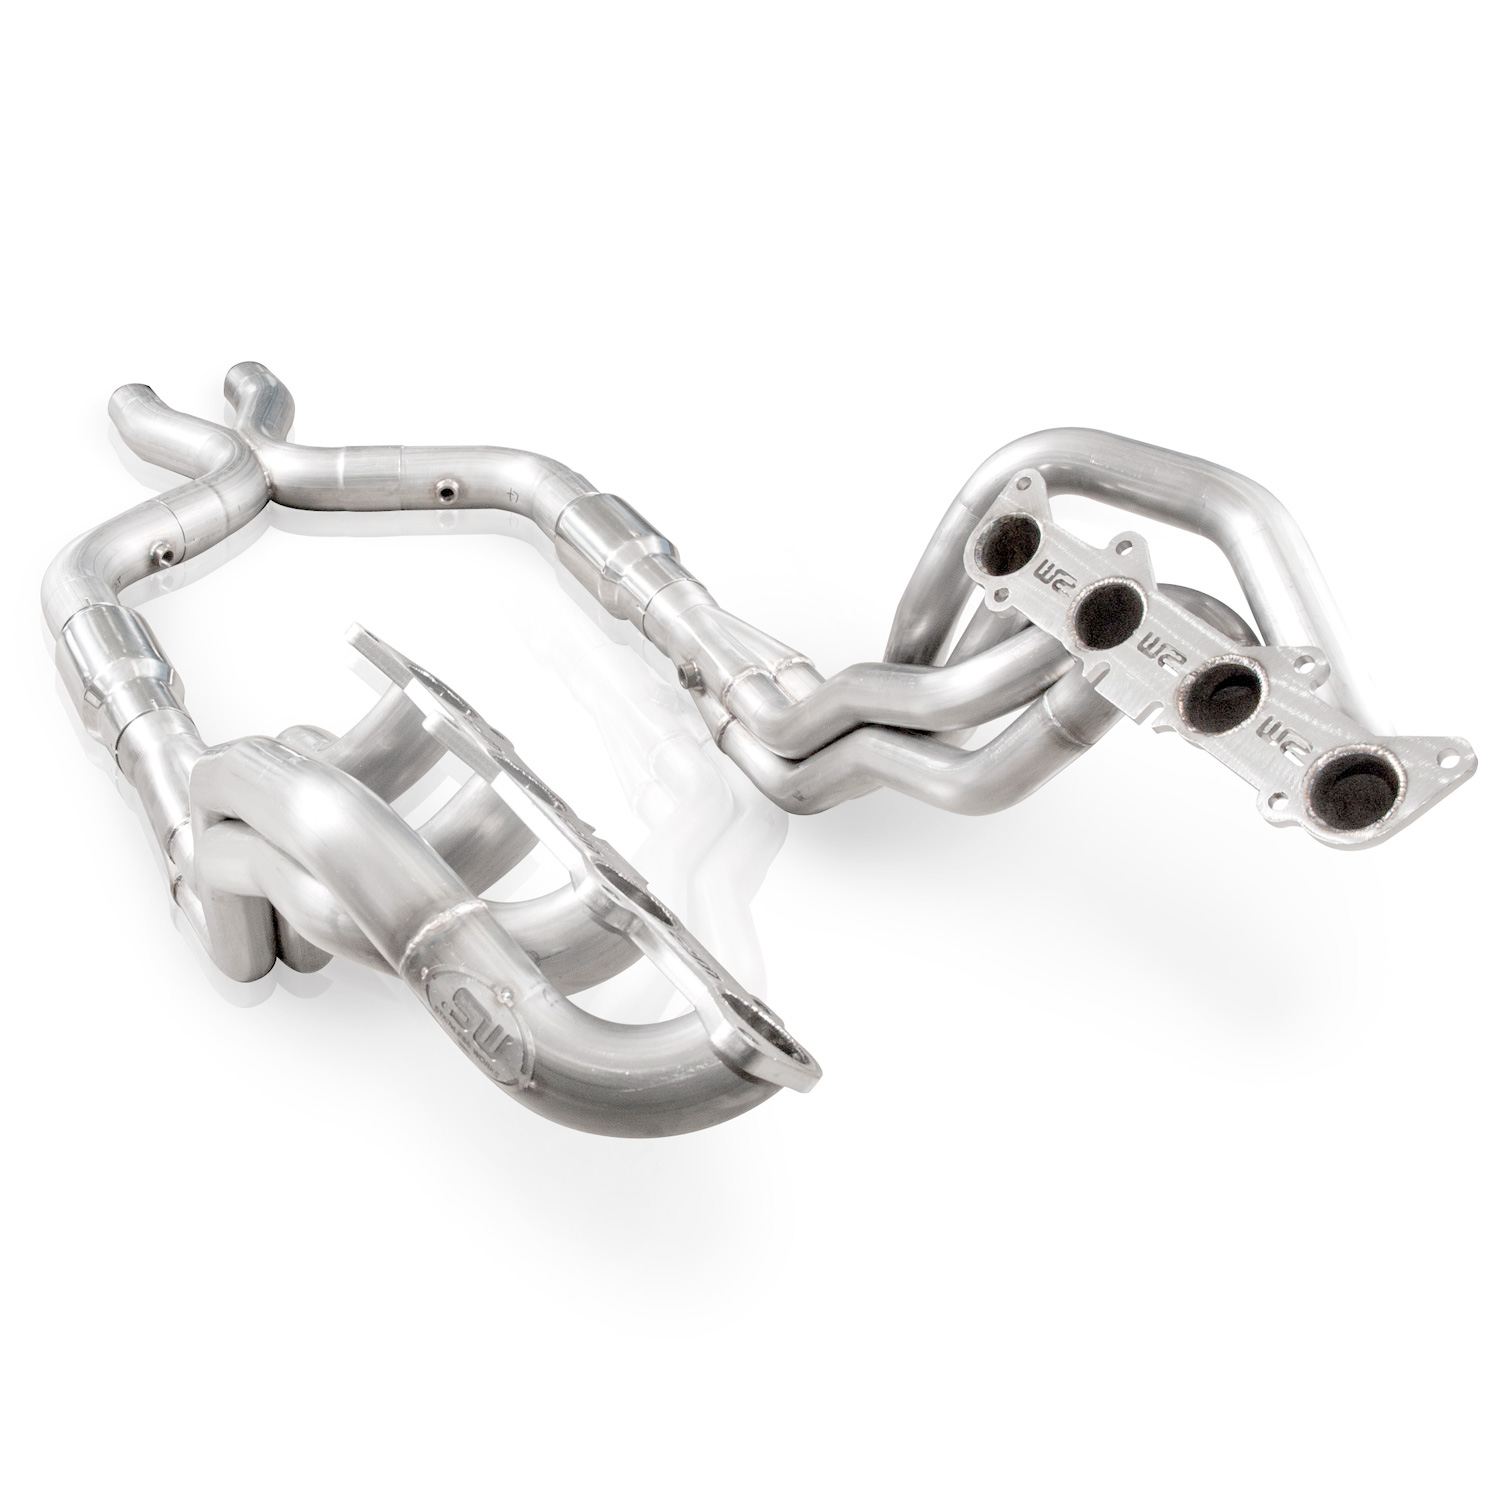 2011-2014 Mustang GT 5.0L SW Headers 1-7/8" With Catted Leads Performance Connect